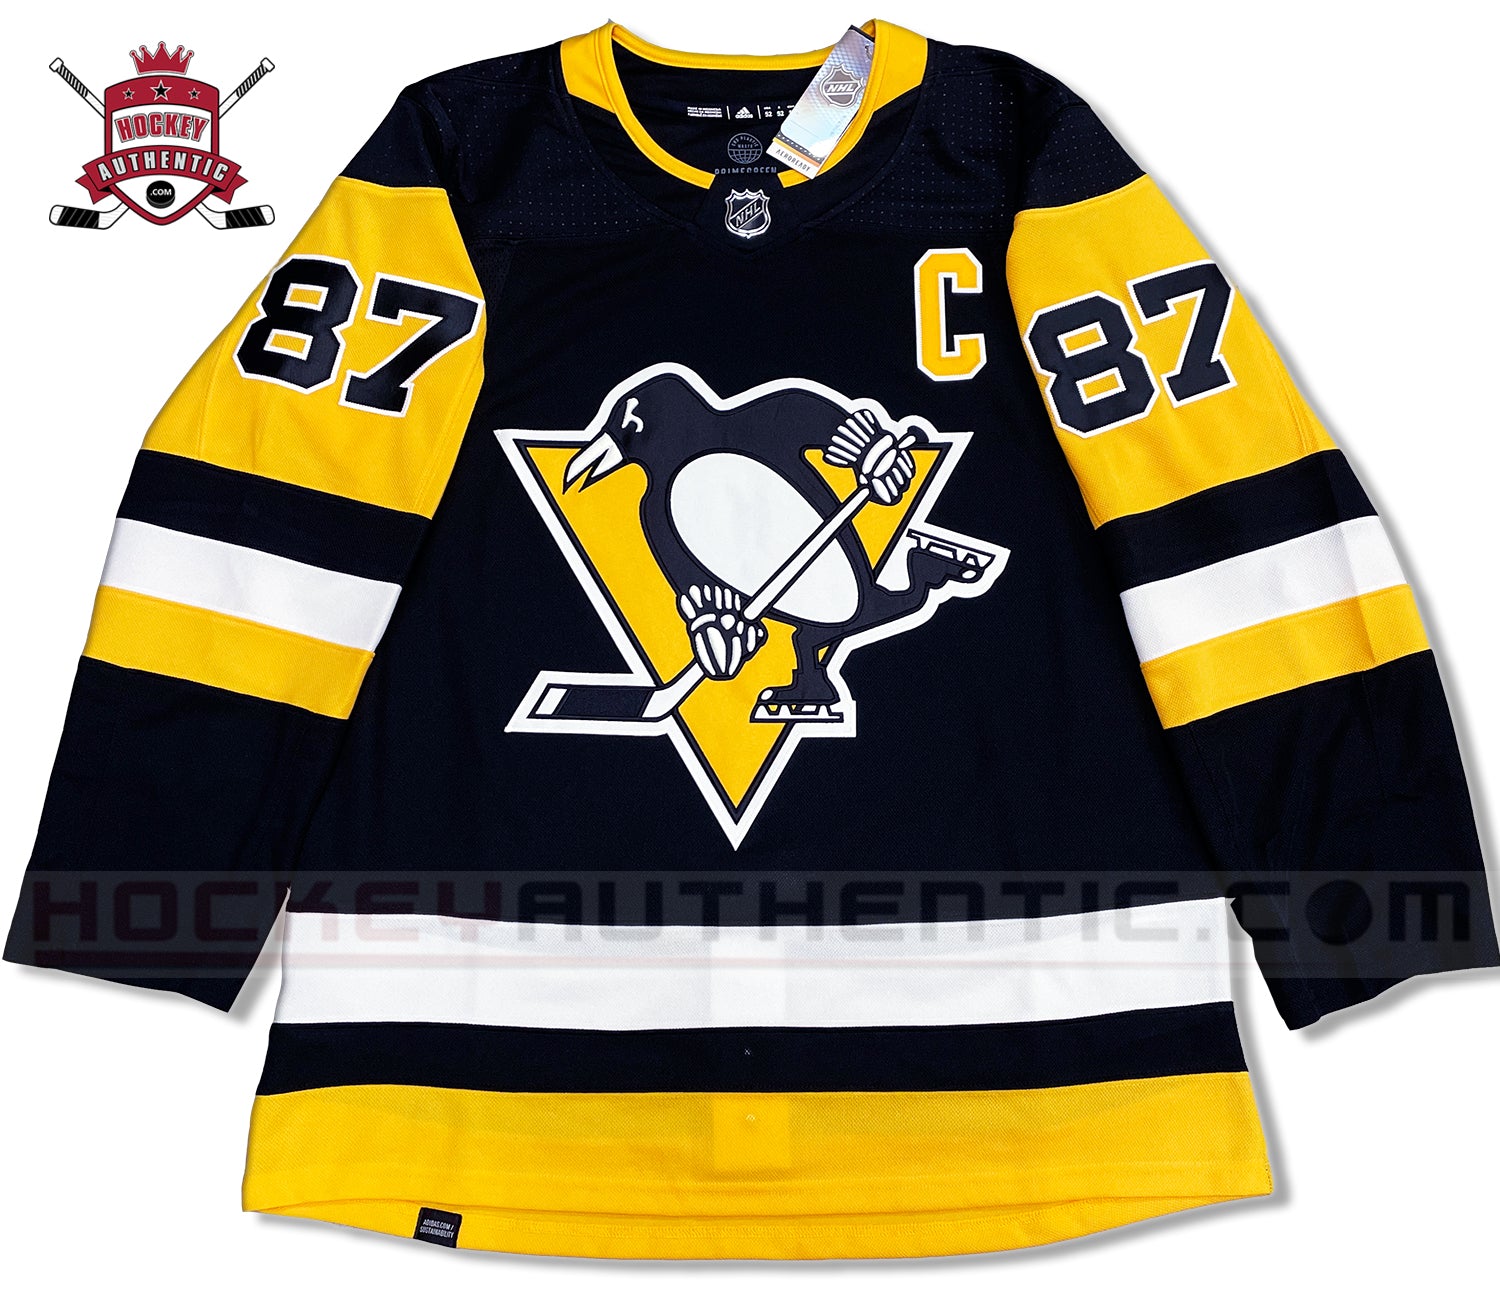 Sidney Crosby has specialized Pittsburgh Penguins jersey made to honour  Humboldt Broncos